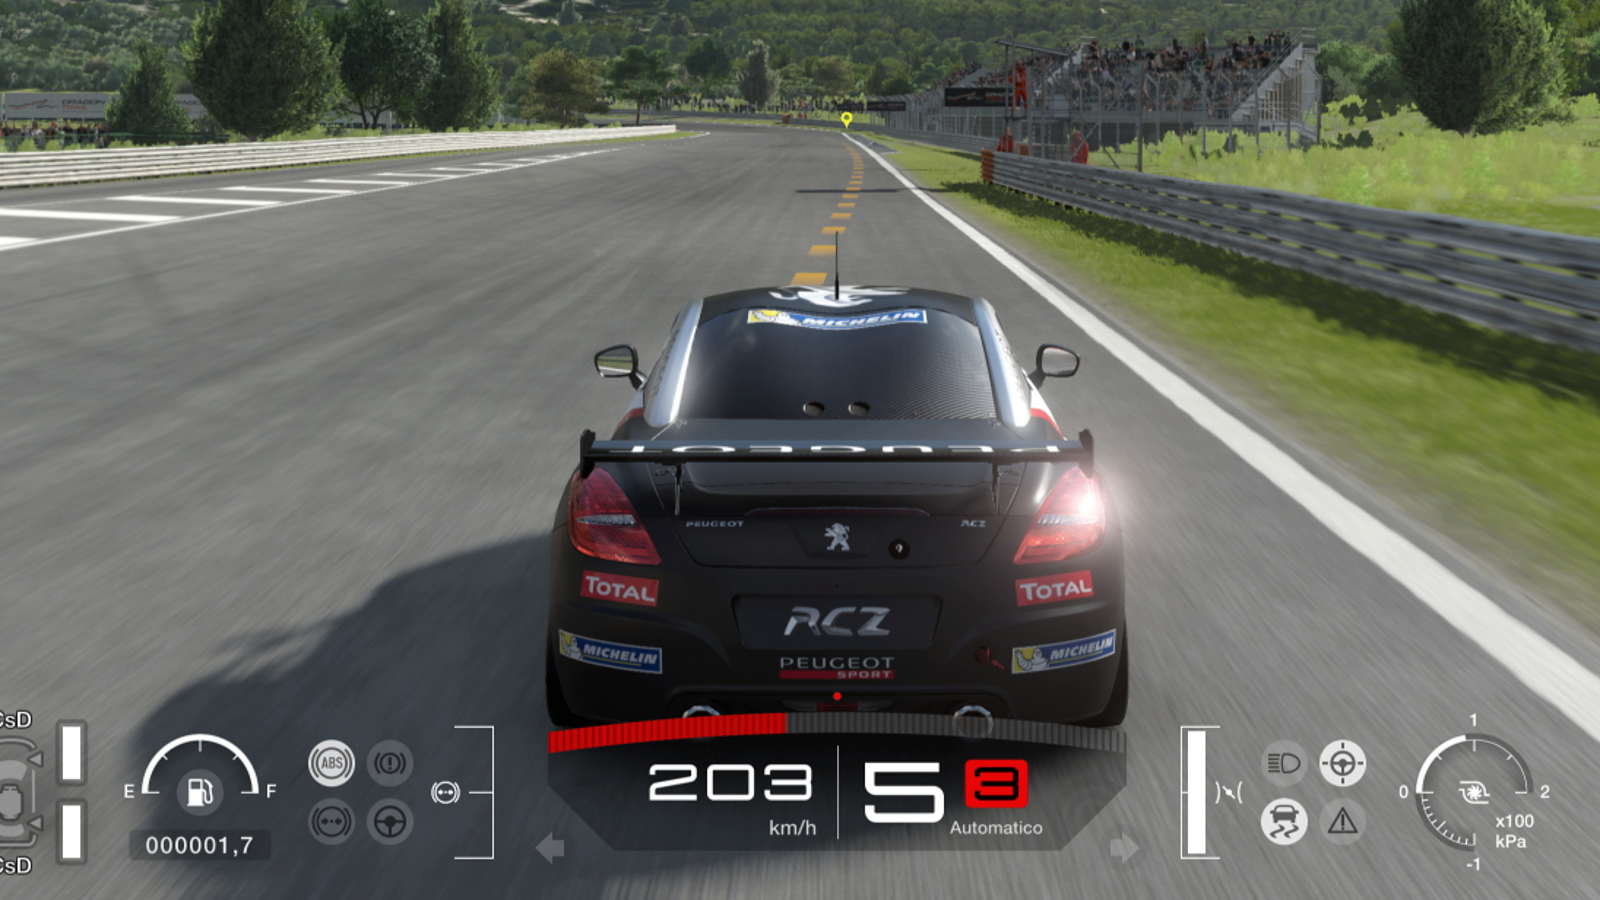 Gran Turismo 7 Currency Rewards to Be Increased Following Player